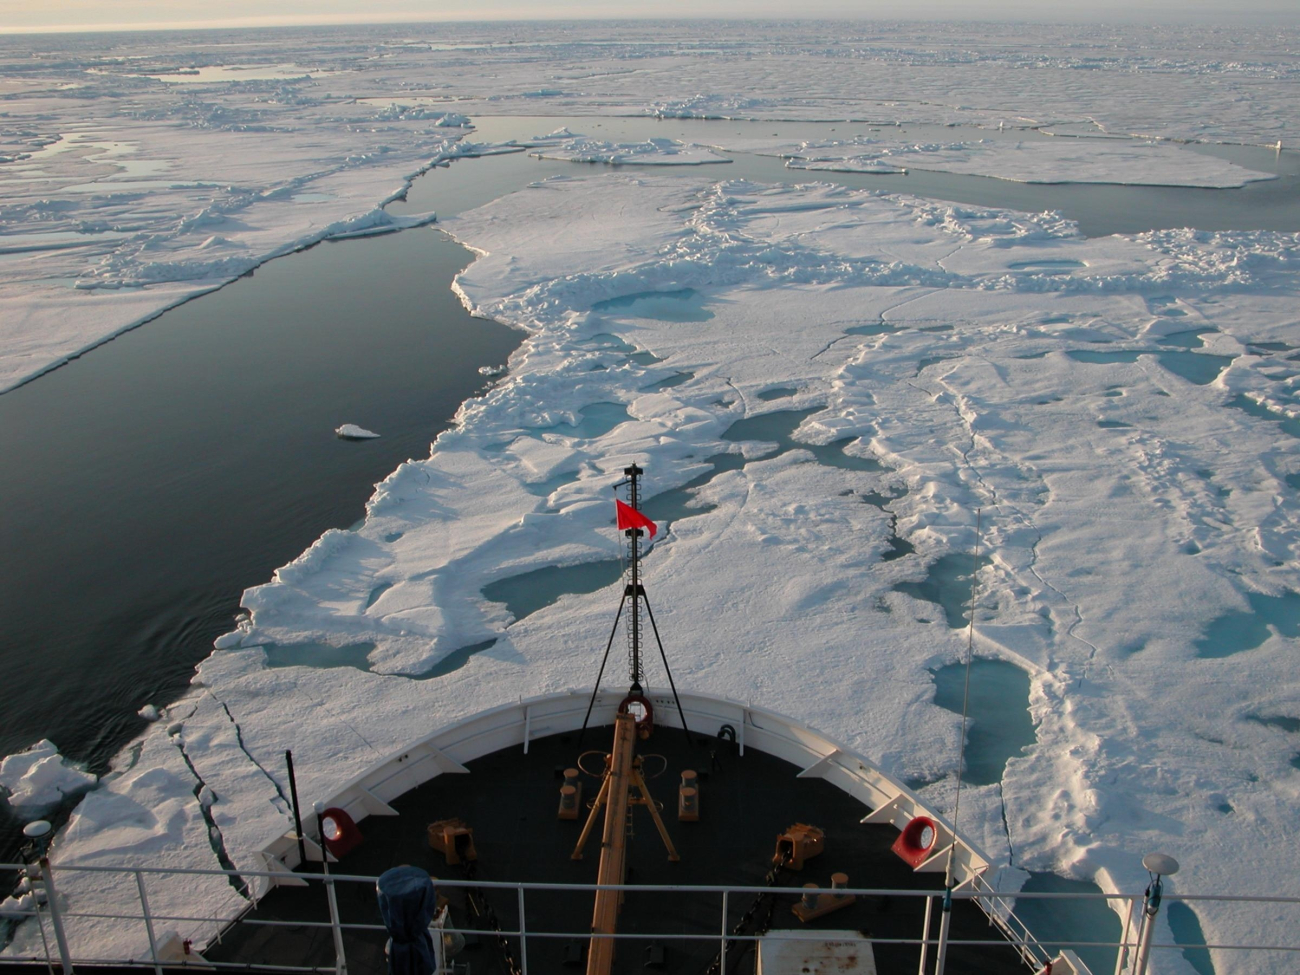 The USCG Icebreaker HEALY cuts through ice sheets in the Arctic Oceanto ferry scientists to various research locations where they will conductscientific research on marine life in all realms of the Canada Basin,one of the deepest parts of the Arctic Ocean